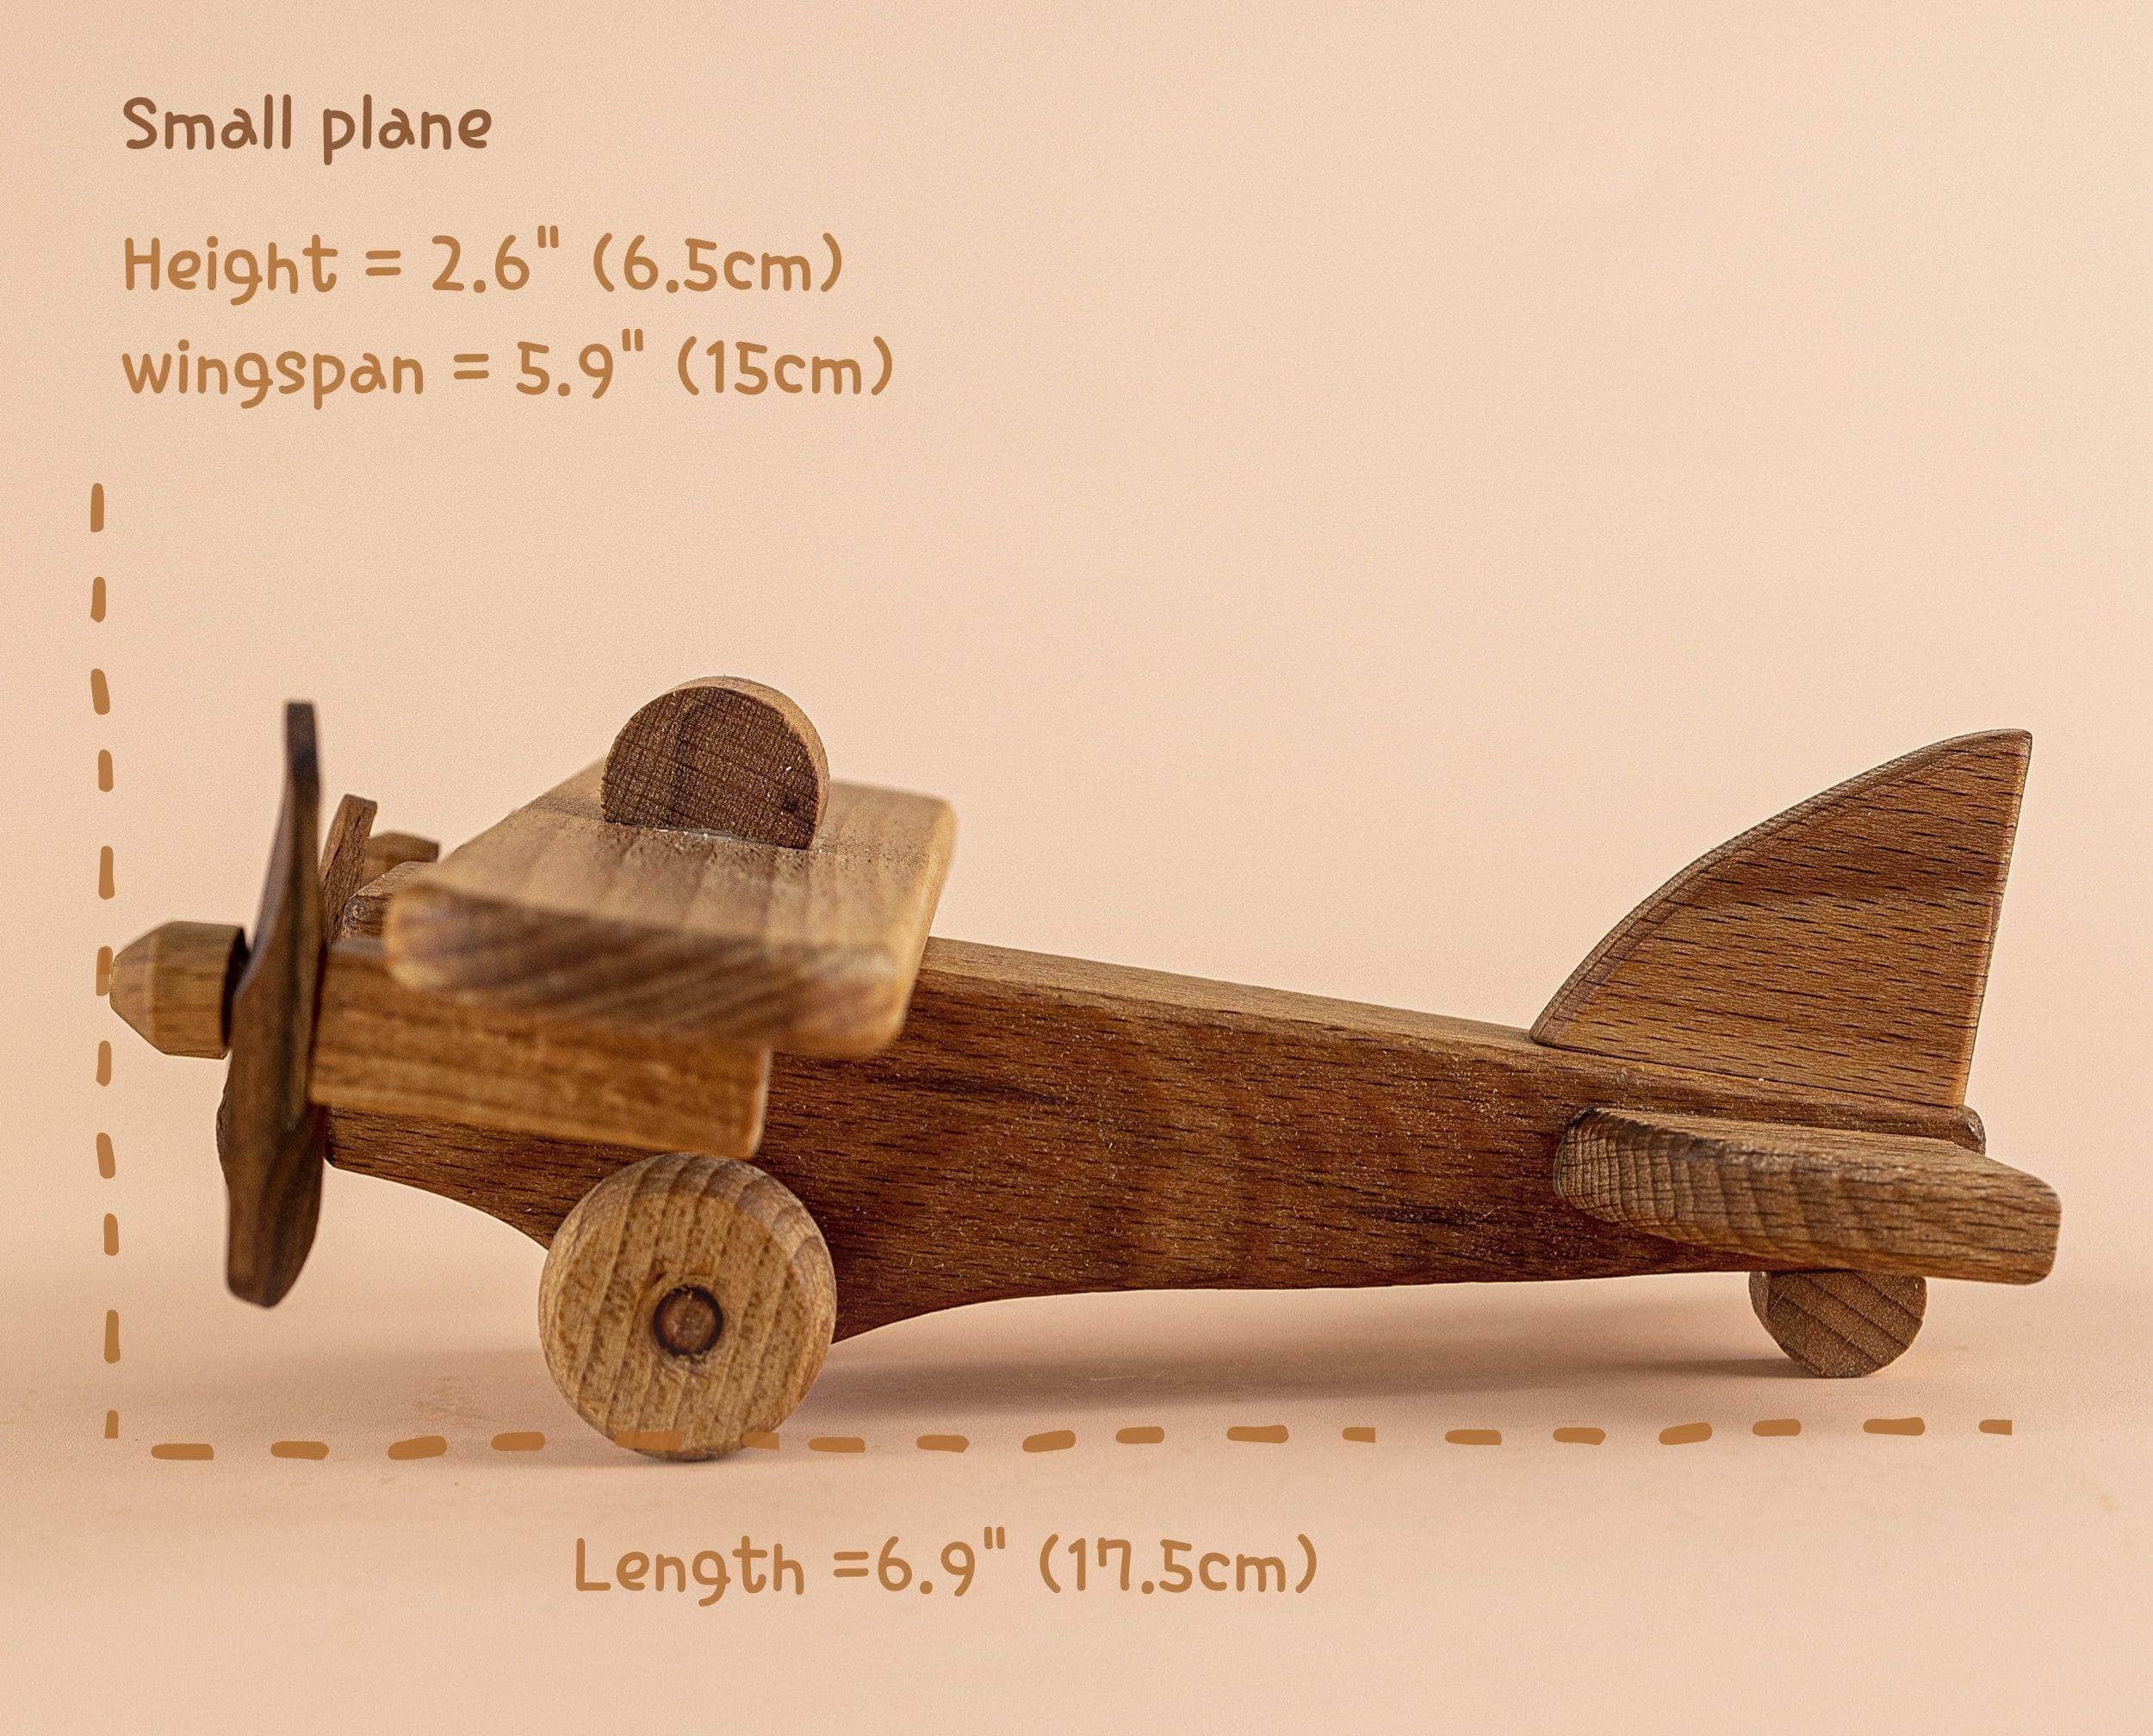 wooden toy airplane that fly